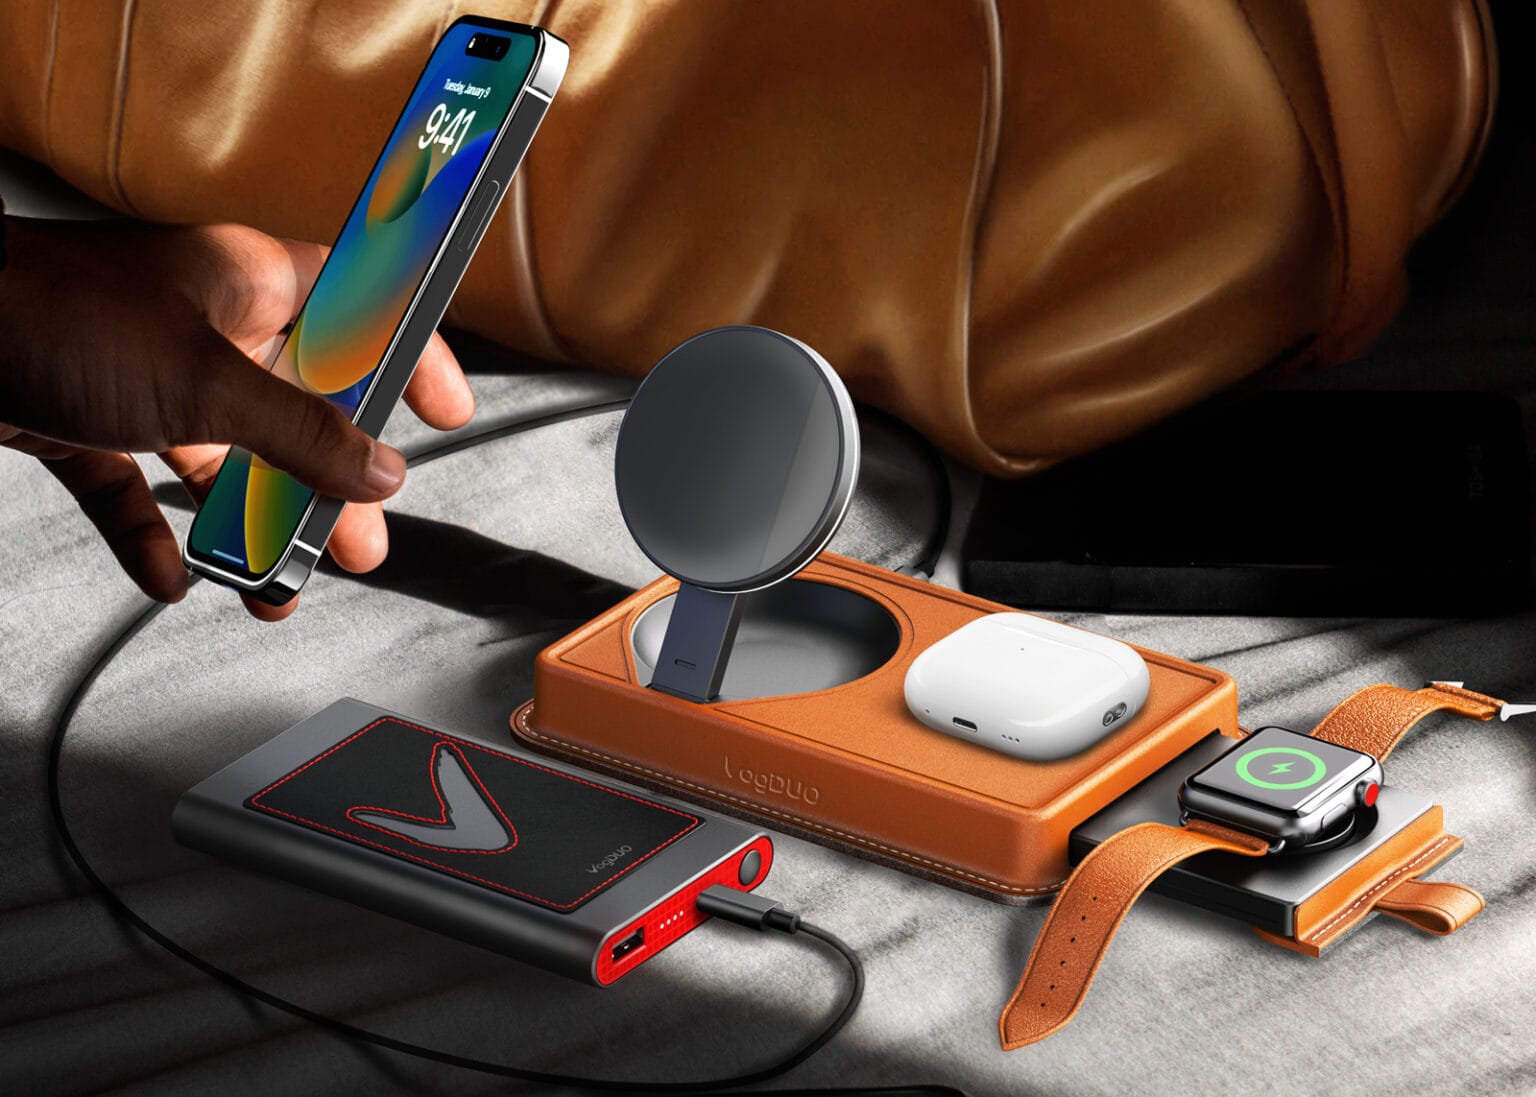 VogDUO's leather-wrapped wireless chargers can add luxury to your everyday carry.